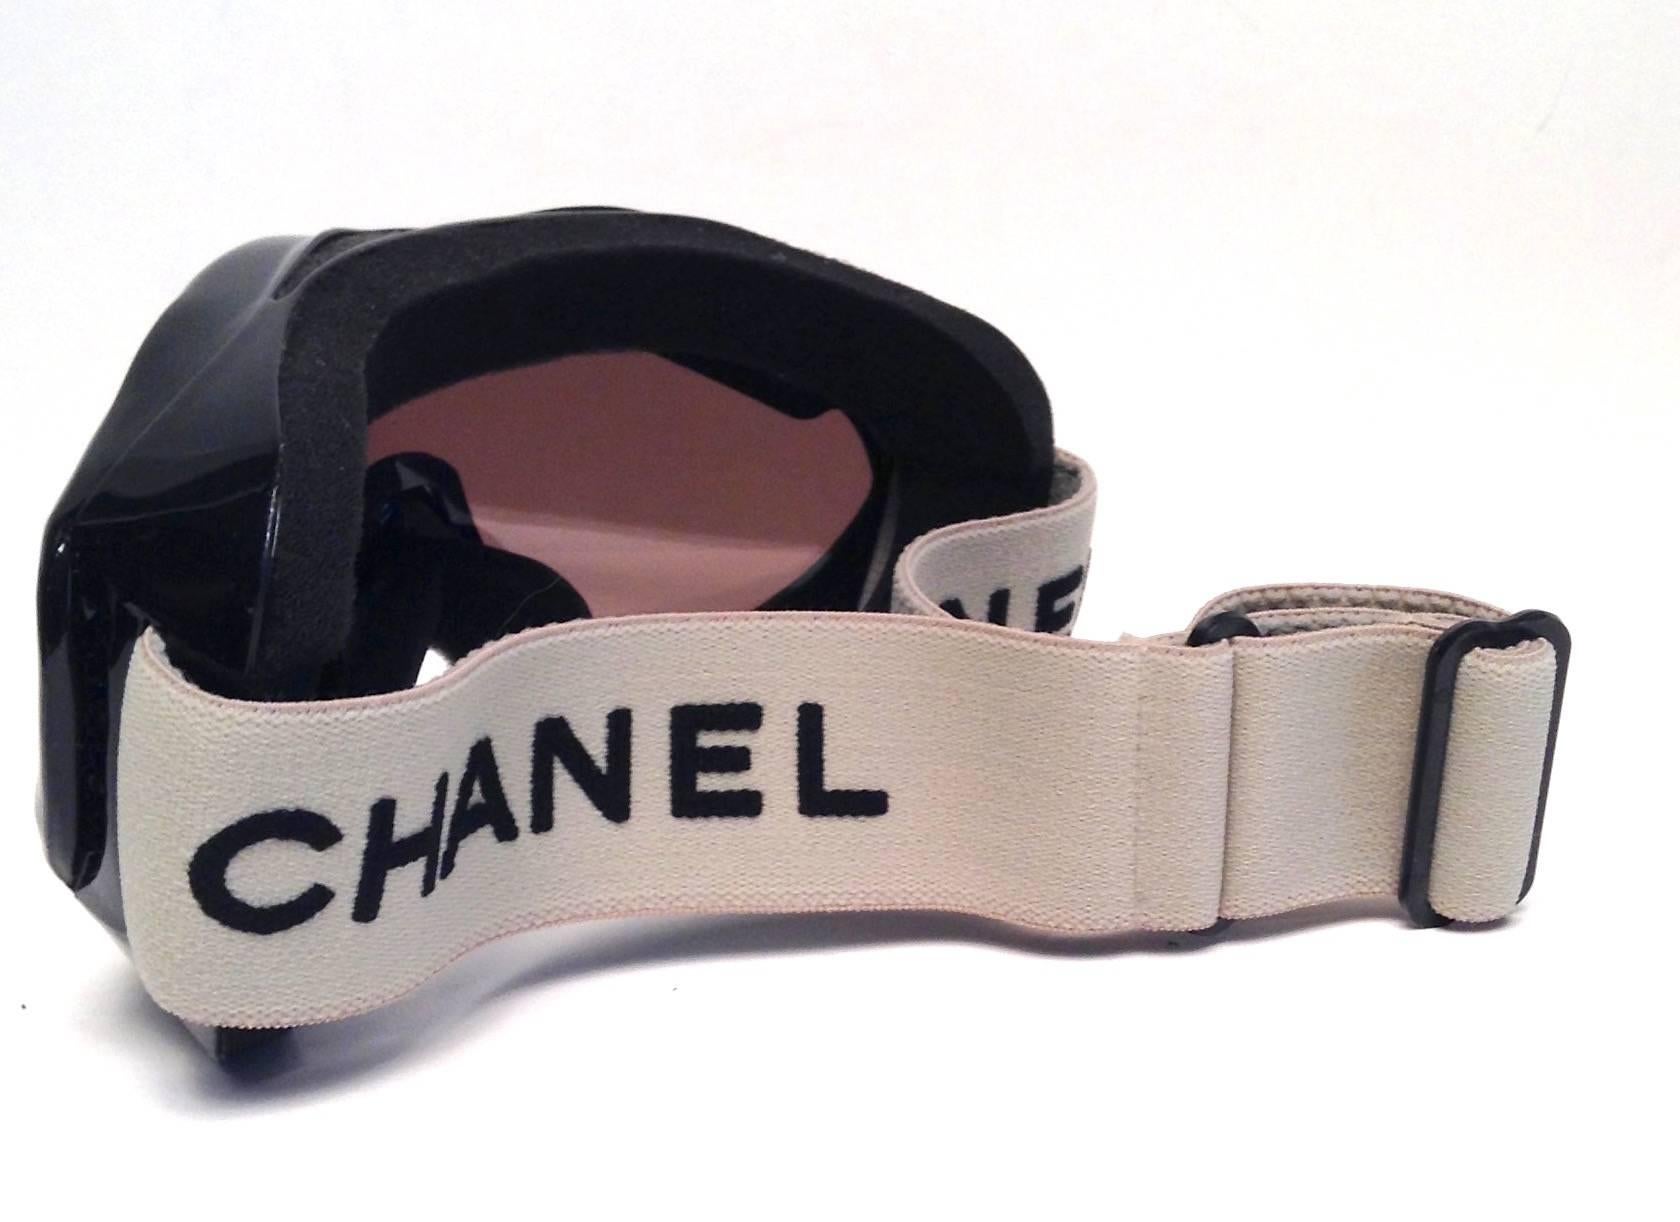 These ski goggles features black rims, slightly tinted eye shield, cushioned interior at rim, and adjustable stretch headband with Chanel logo. 
Width: 6.5